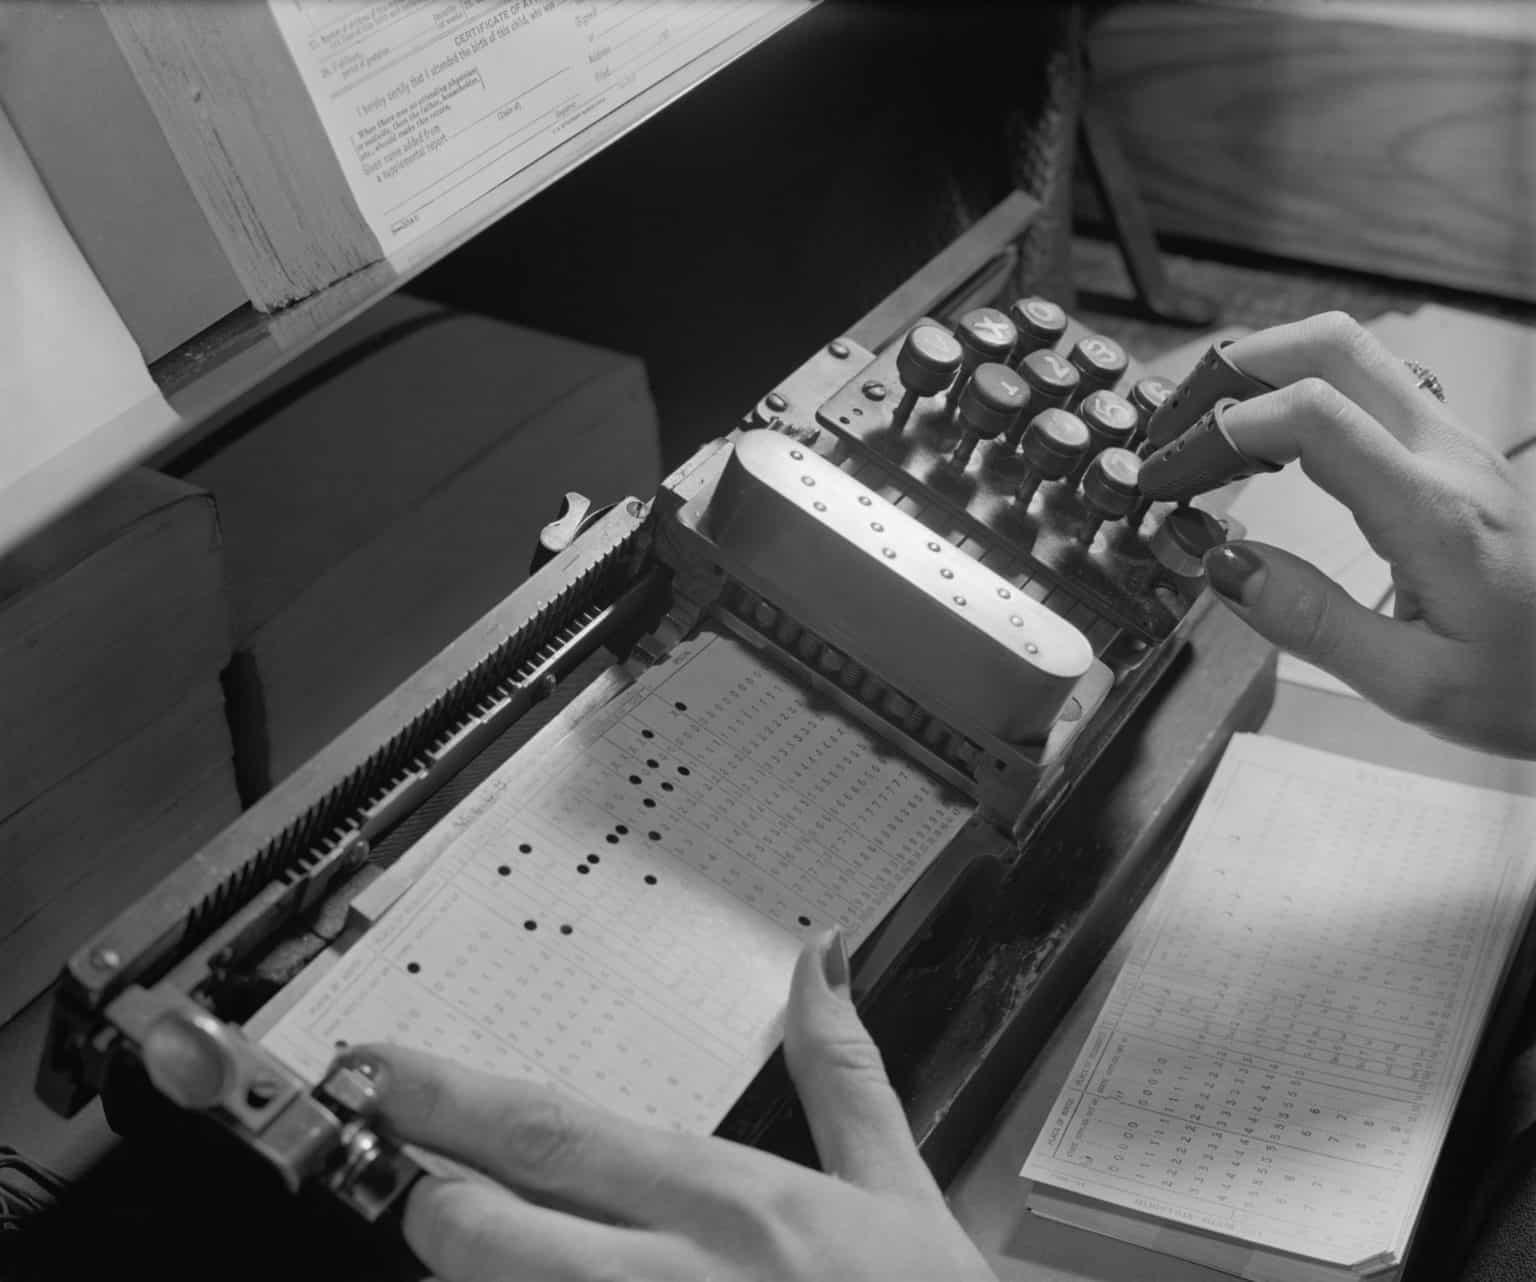 Electronic counting machine as metaphor for frequency